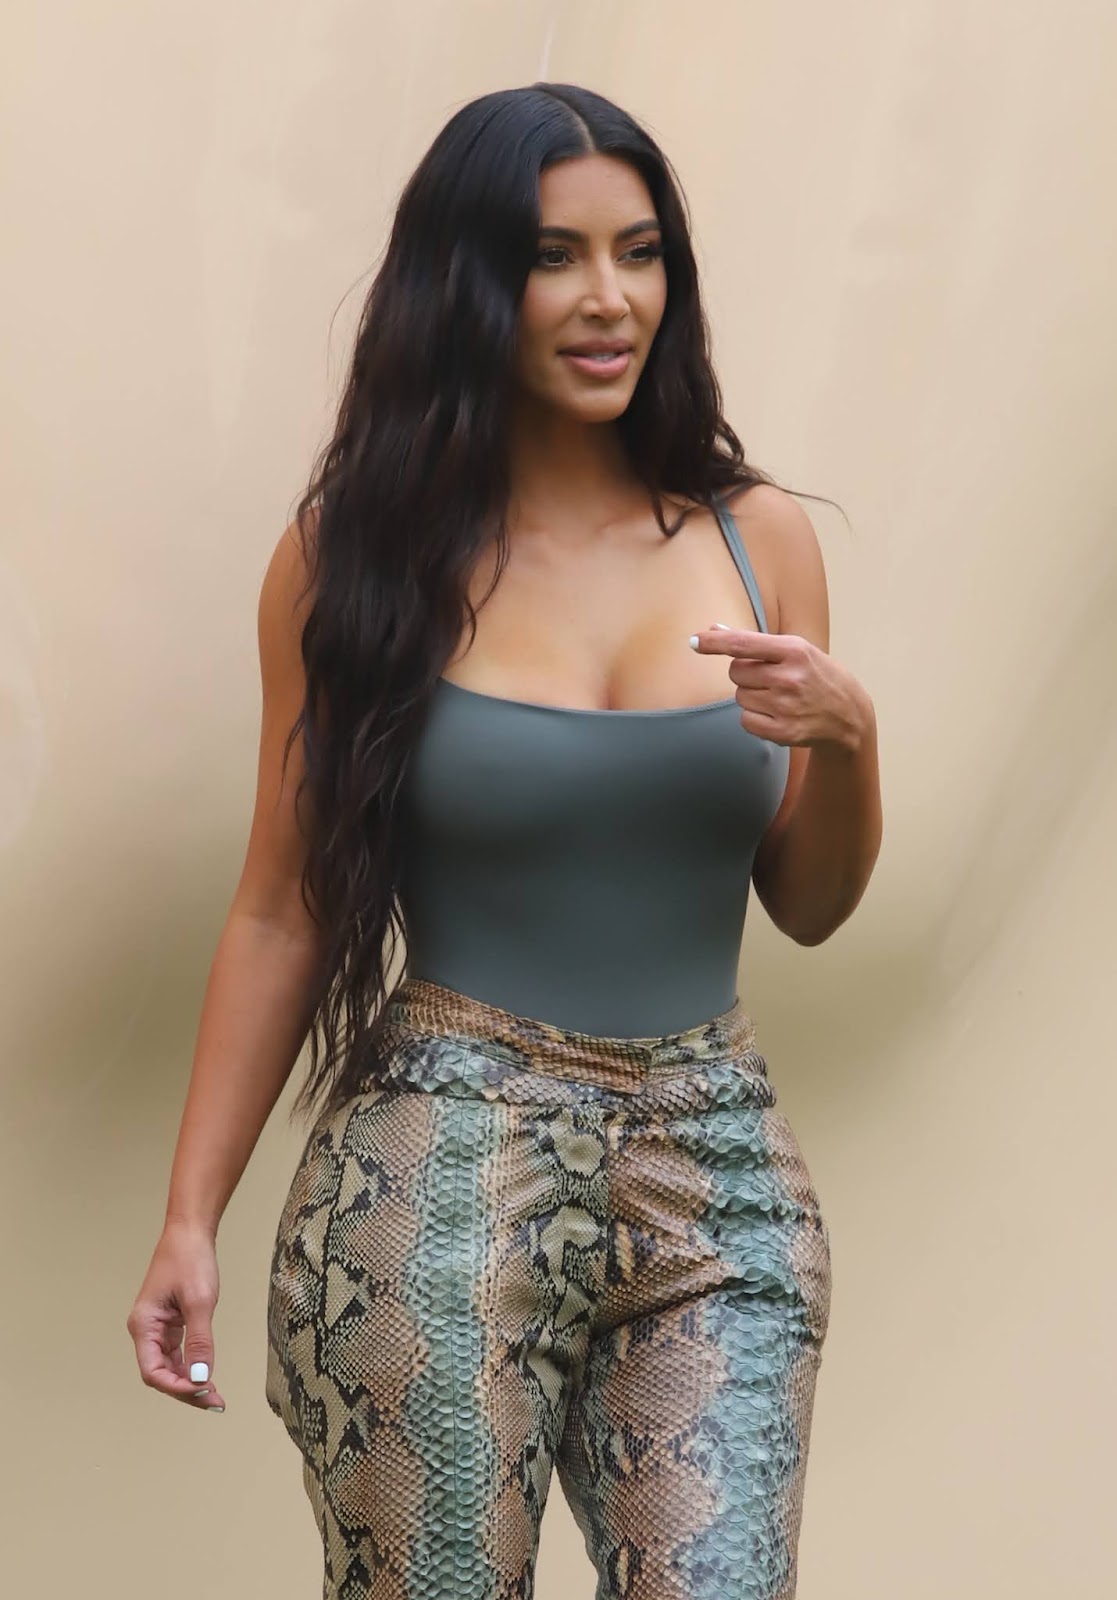 Kim Kardashian made a surprise visit to her SKIMS pop-up shop at the Grove shopping center in LA.